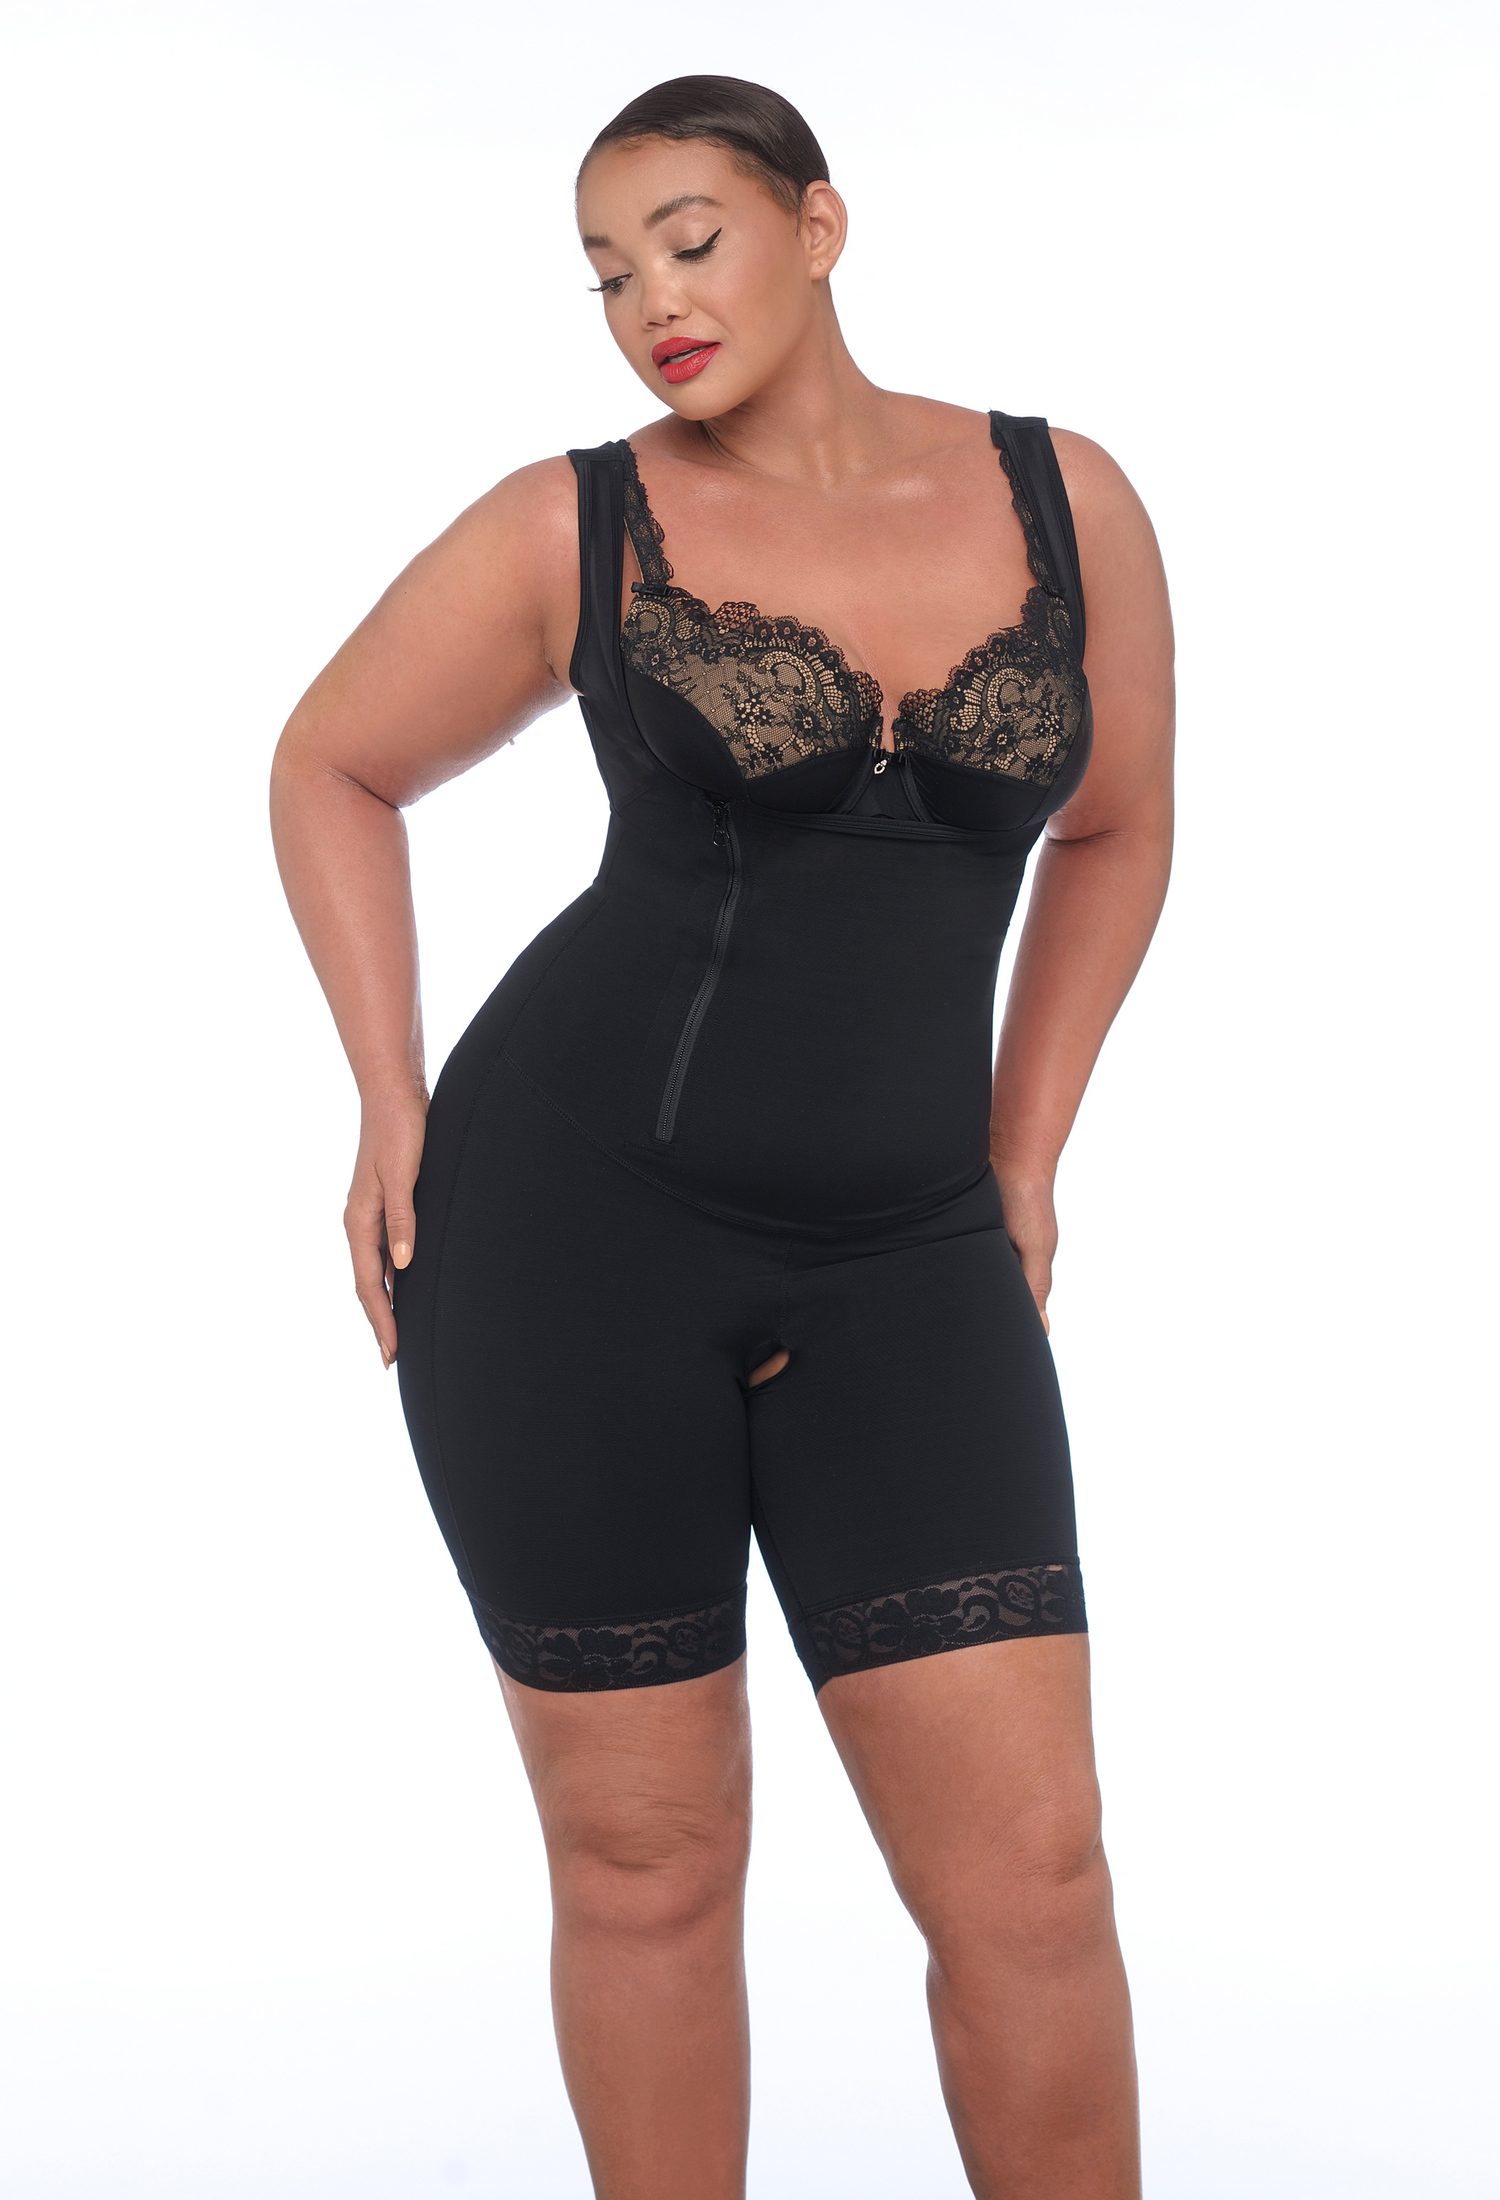 Diva's Curves Shapewear Compression Foundation garment That Will Define You